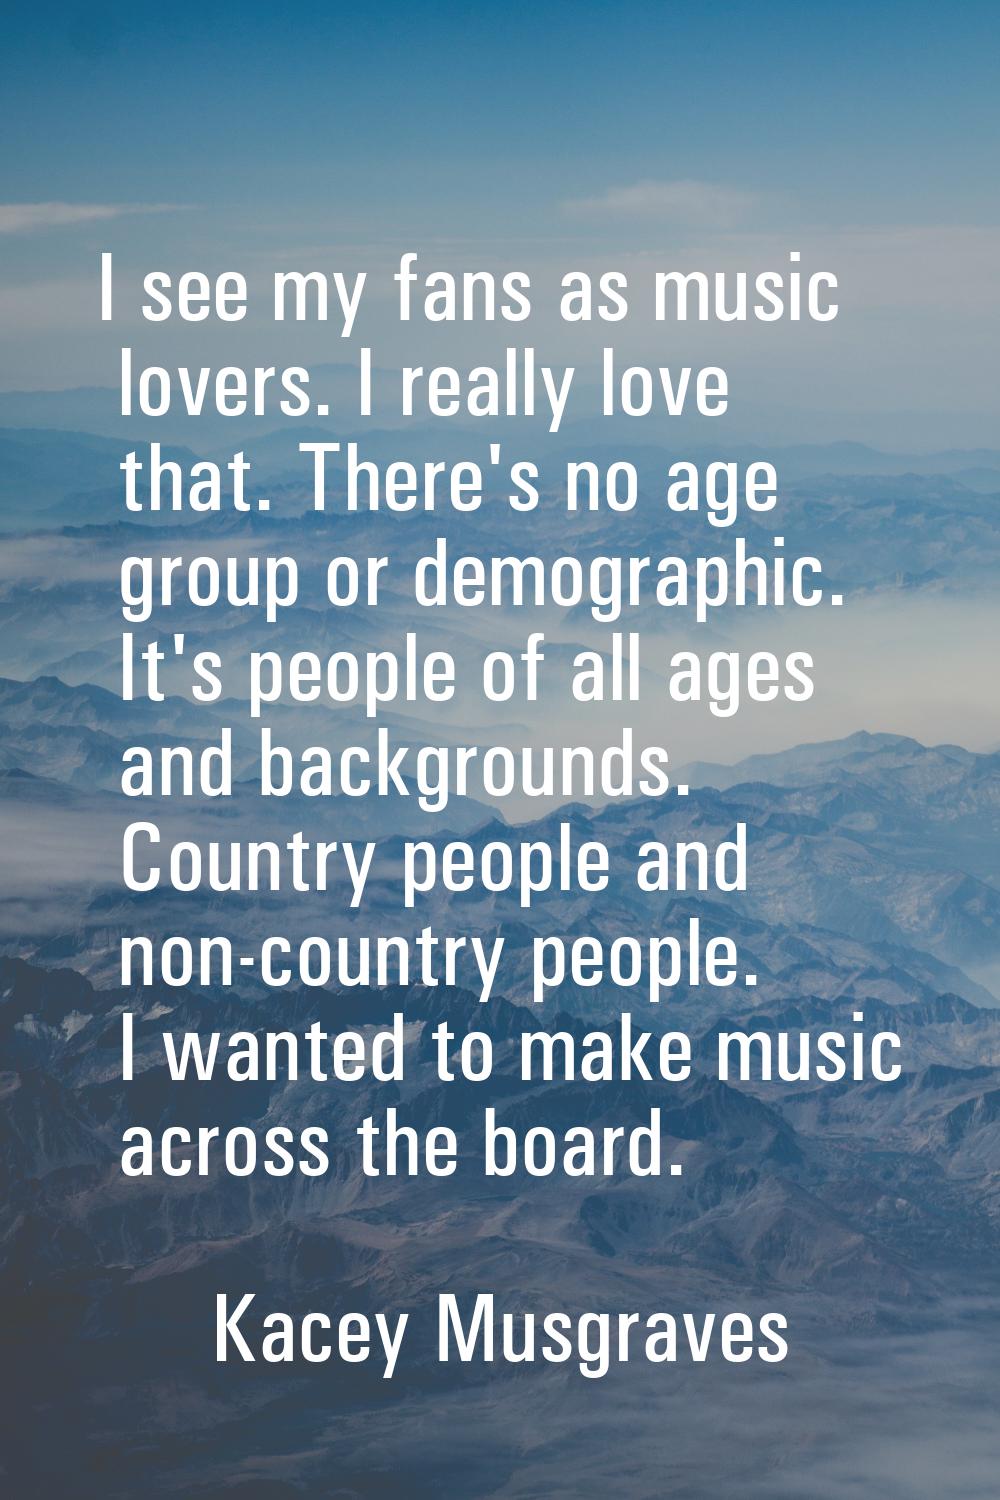 I see my fans as music lovers. I really love that. There's no age group or demographic. It's people